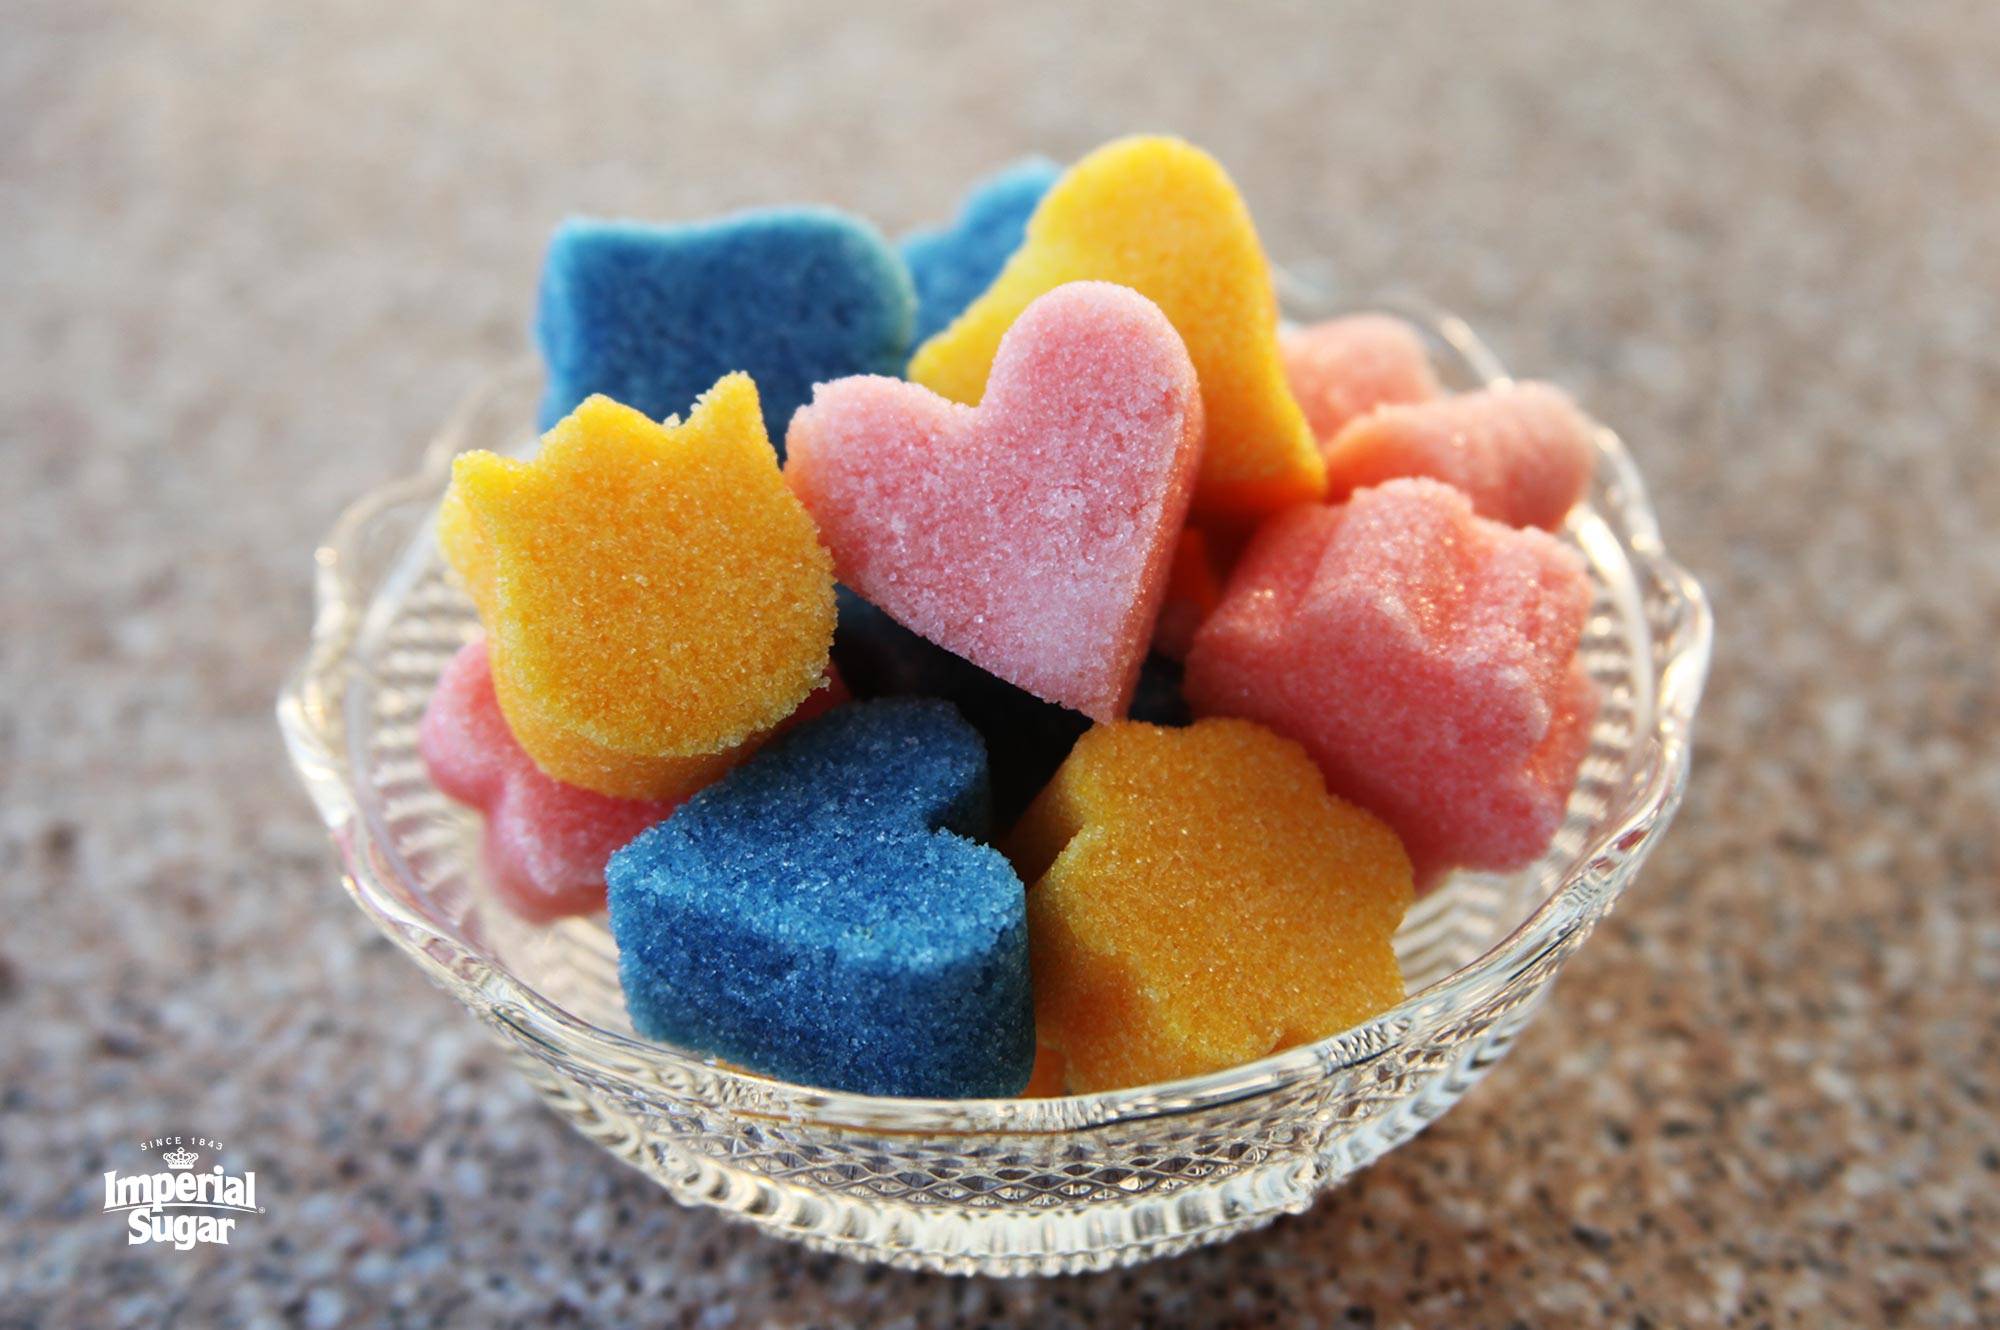 Colored Shaped and Flavored Sugar Cubes